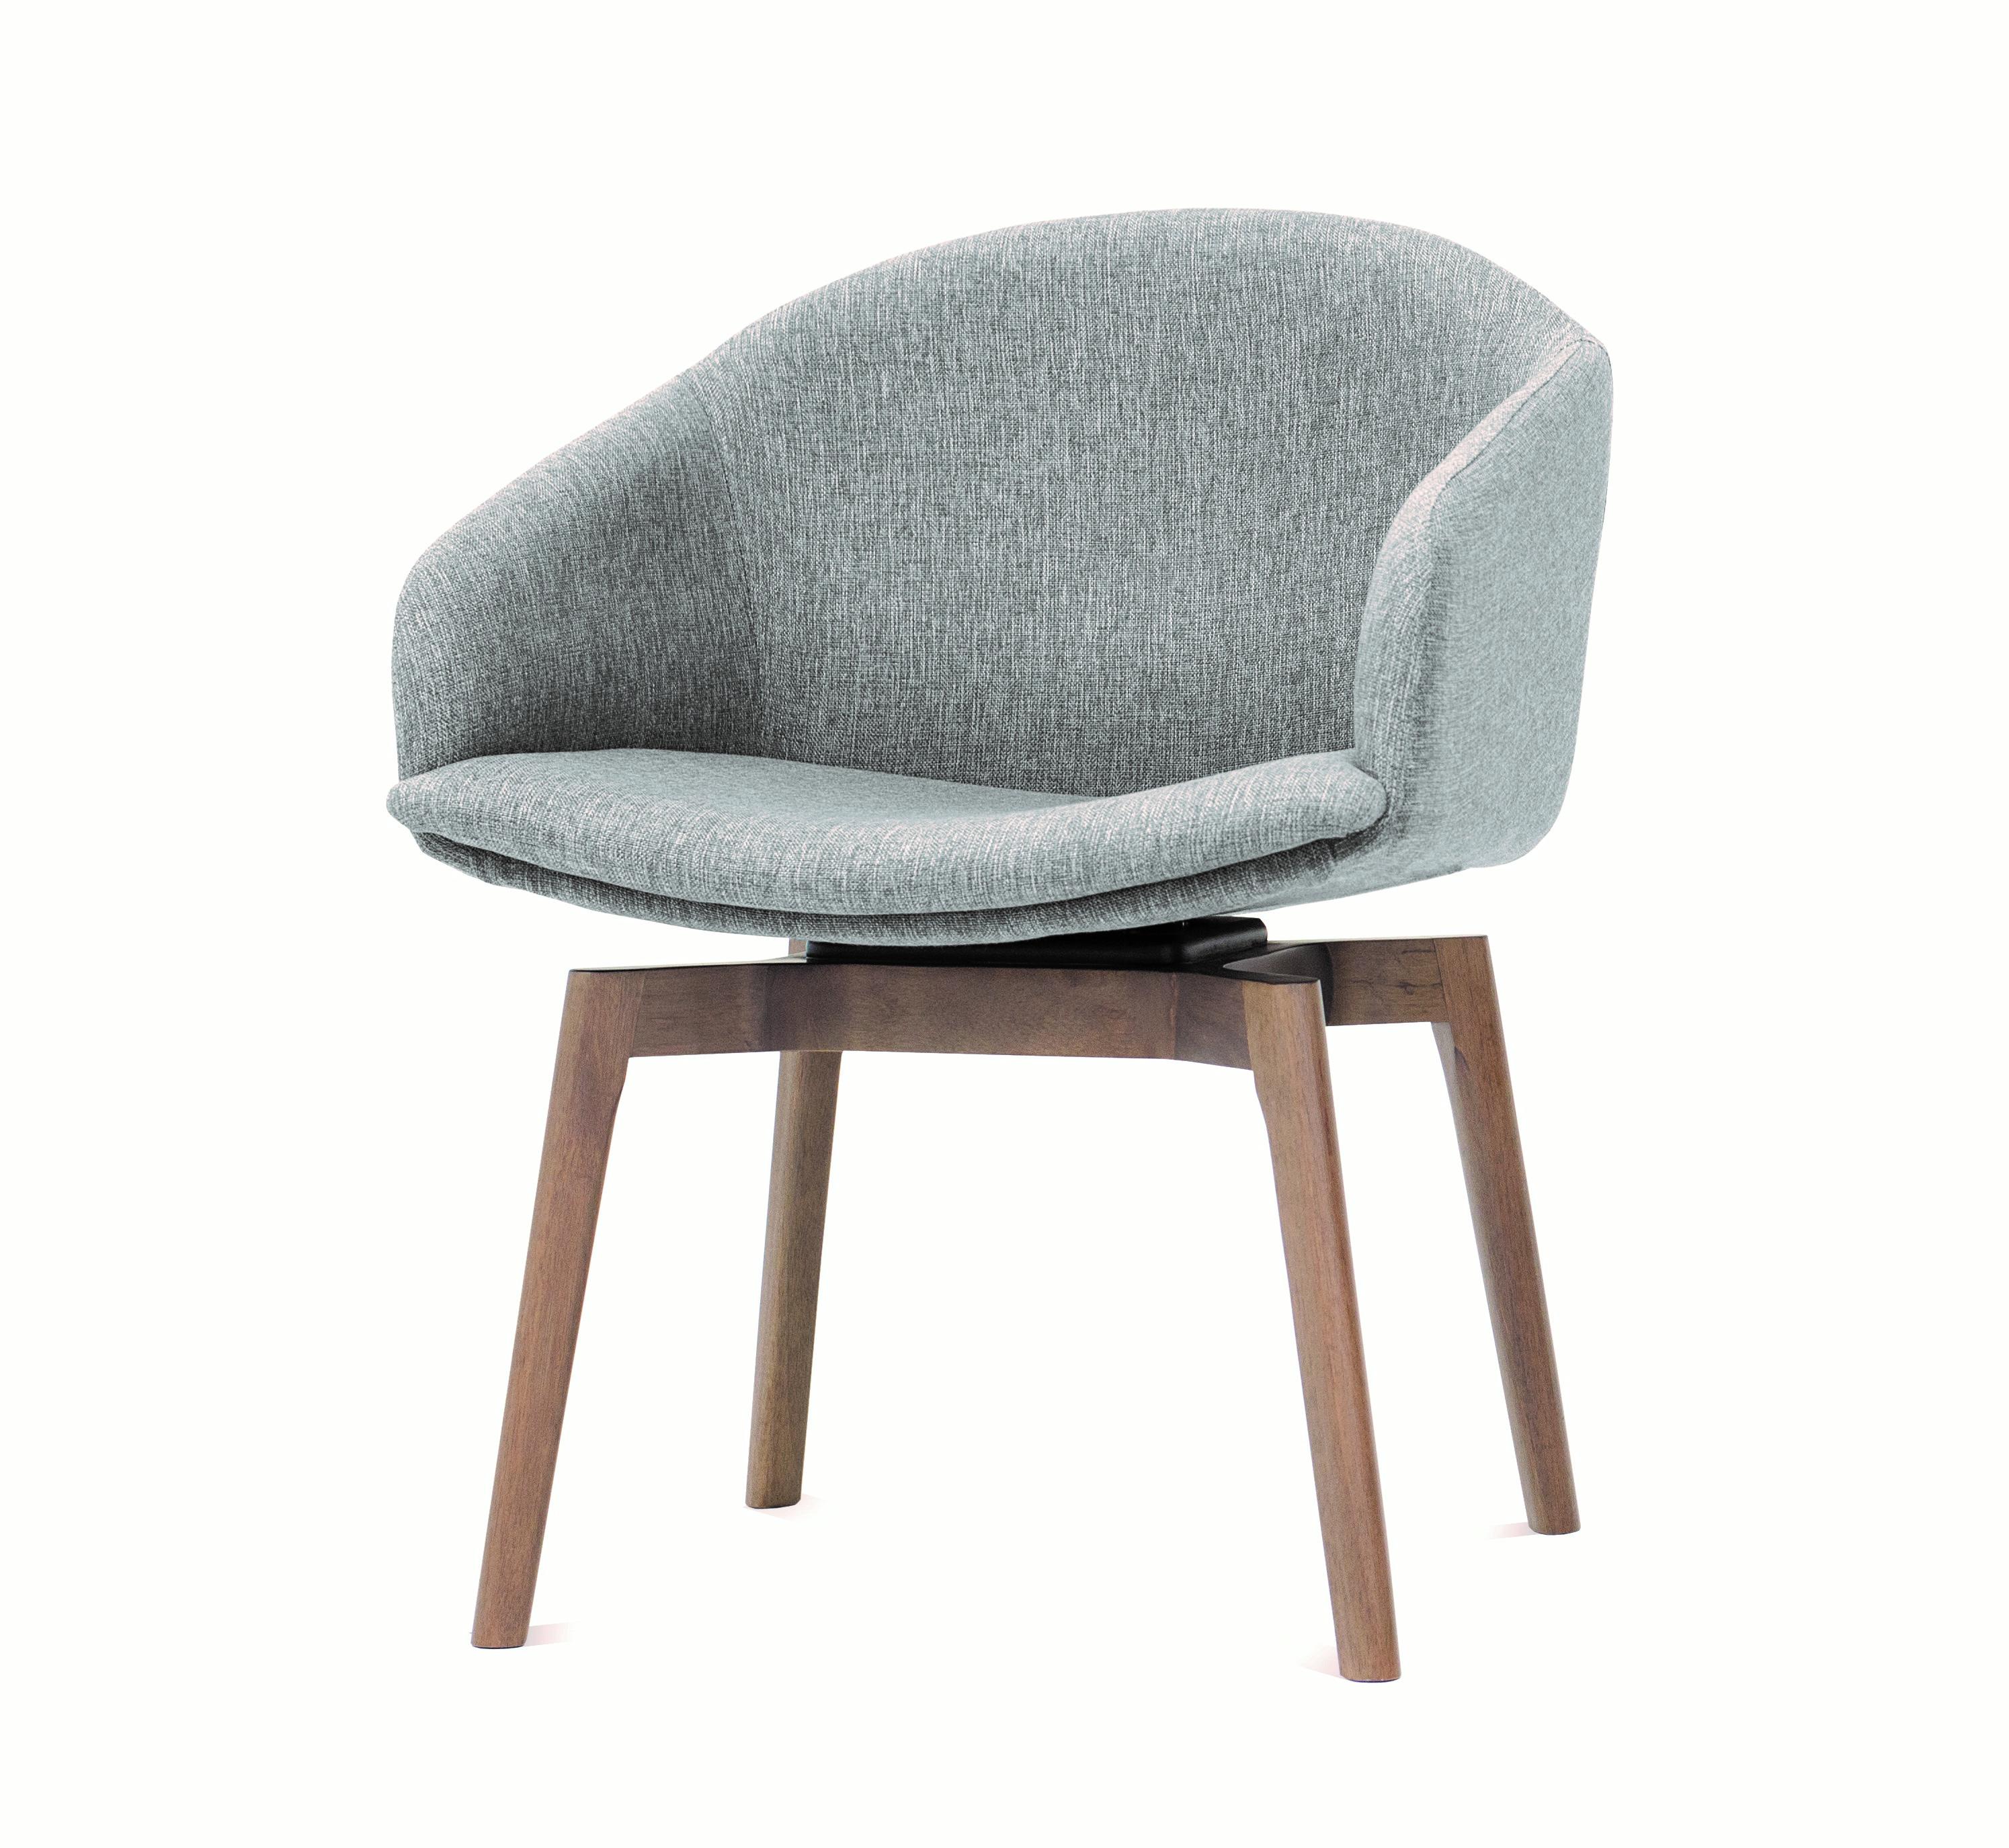 This gray upholstery Dim dining chair with armrest and walnut foot consists in a perfect finishing touch to your classic or modern space. High-end material and details define the shapes of this piece of furniture to perfectly fit your home. Can also